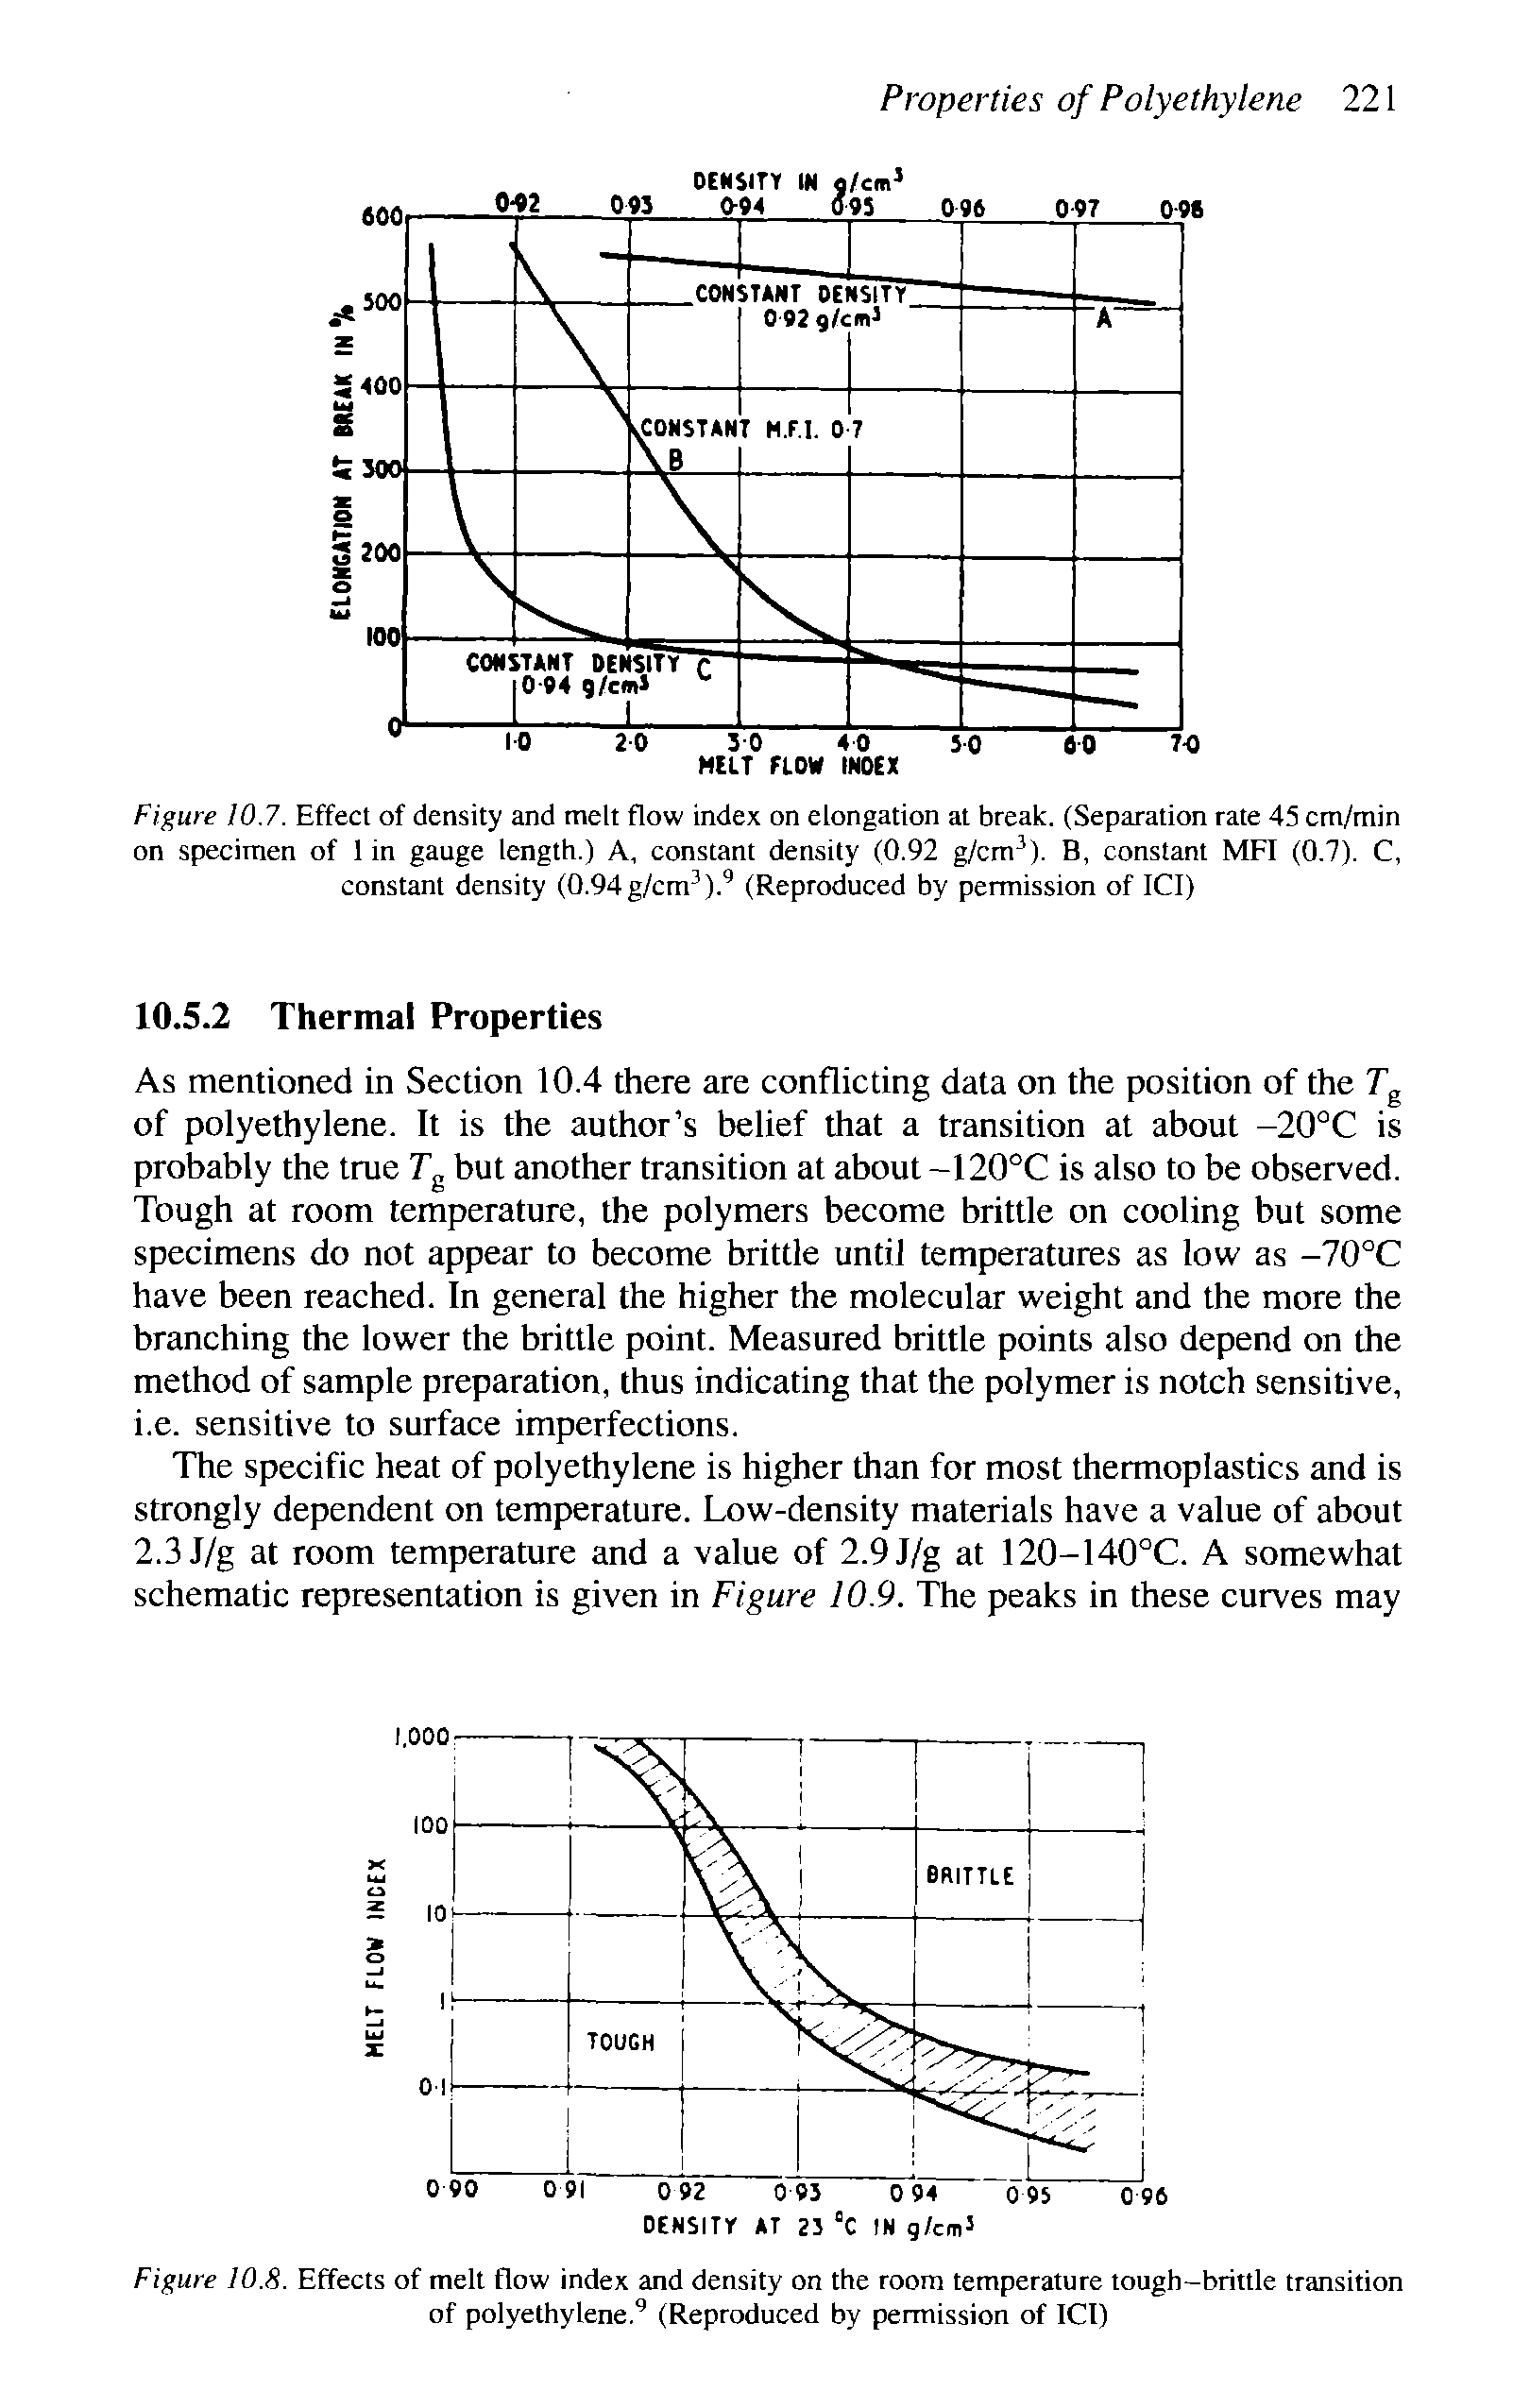 Figure 10.8. Effects of melt flow index and density on the room temperature tough-brittle transition of polyethylene. (Reproduced by permission of ICI)...